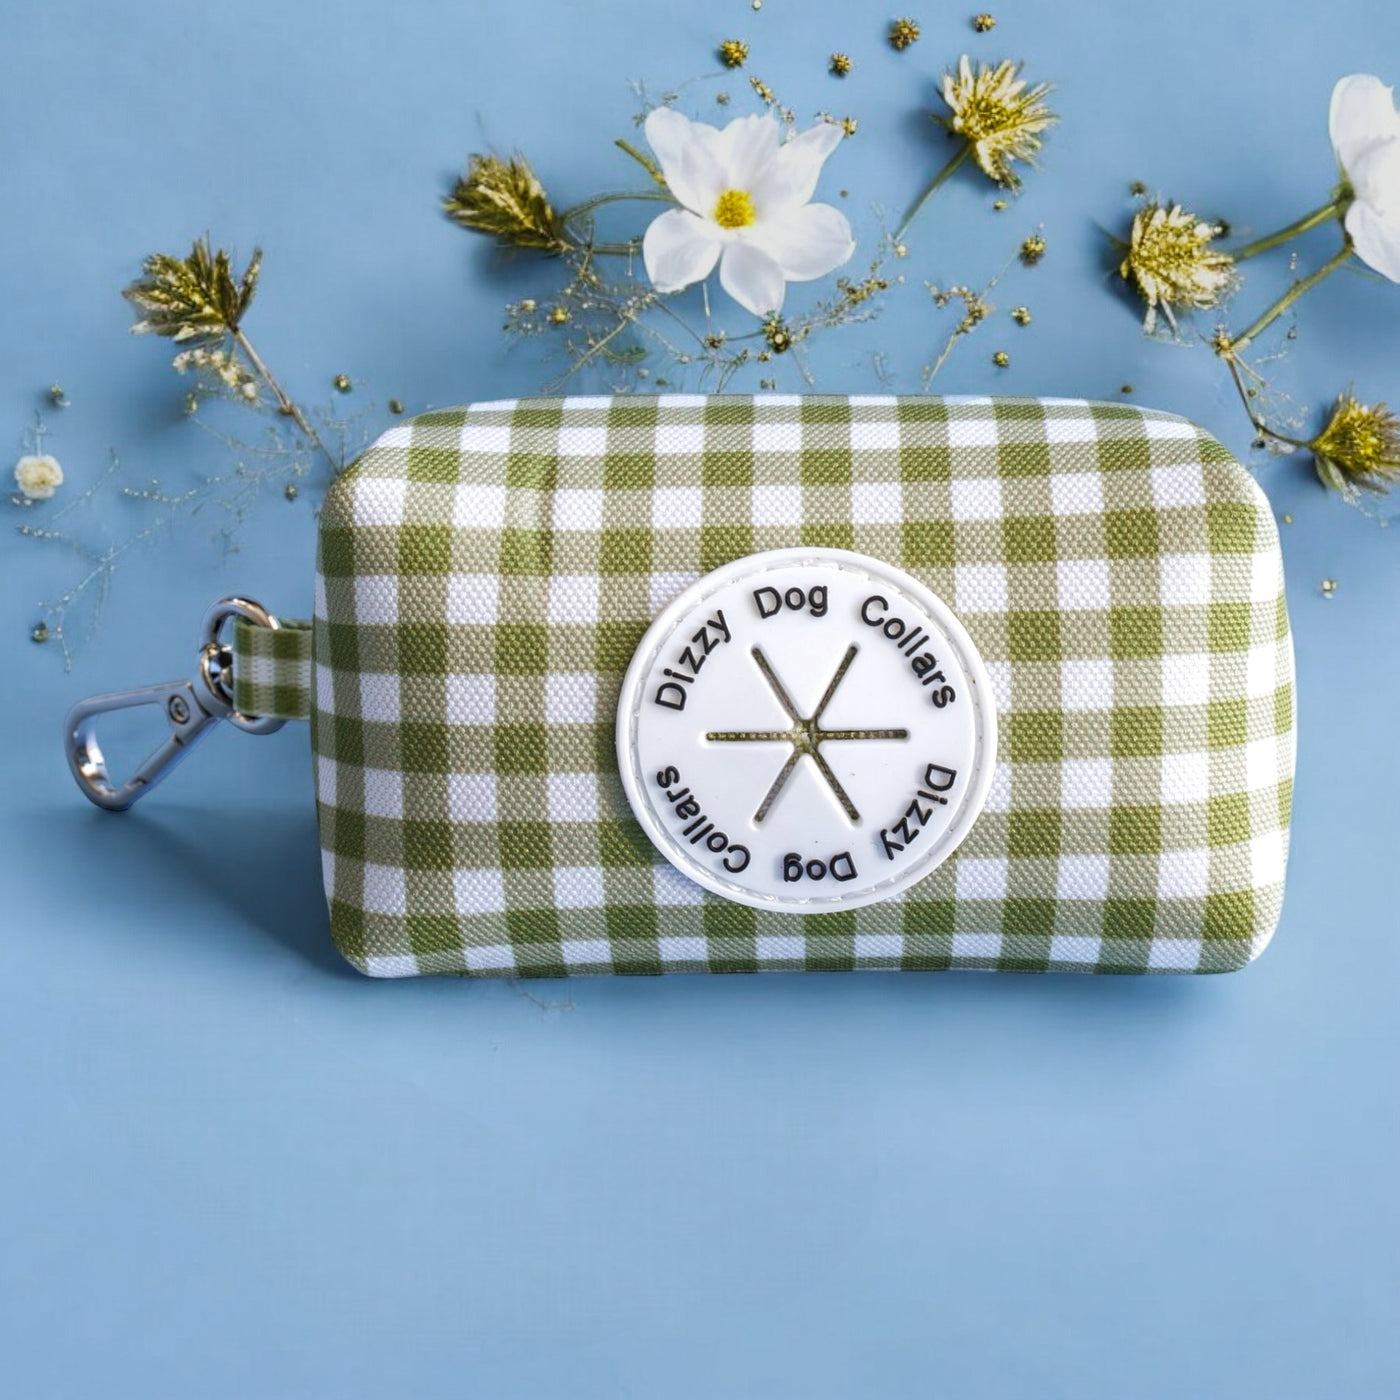 The image features a green and white checkered dog bag on a light blue background, adorned with white and gold flowers. The bag is labeled "Dizzy Dog Collars," and the composition focuses on the bag with an elegant touch of floral decorations.